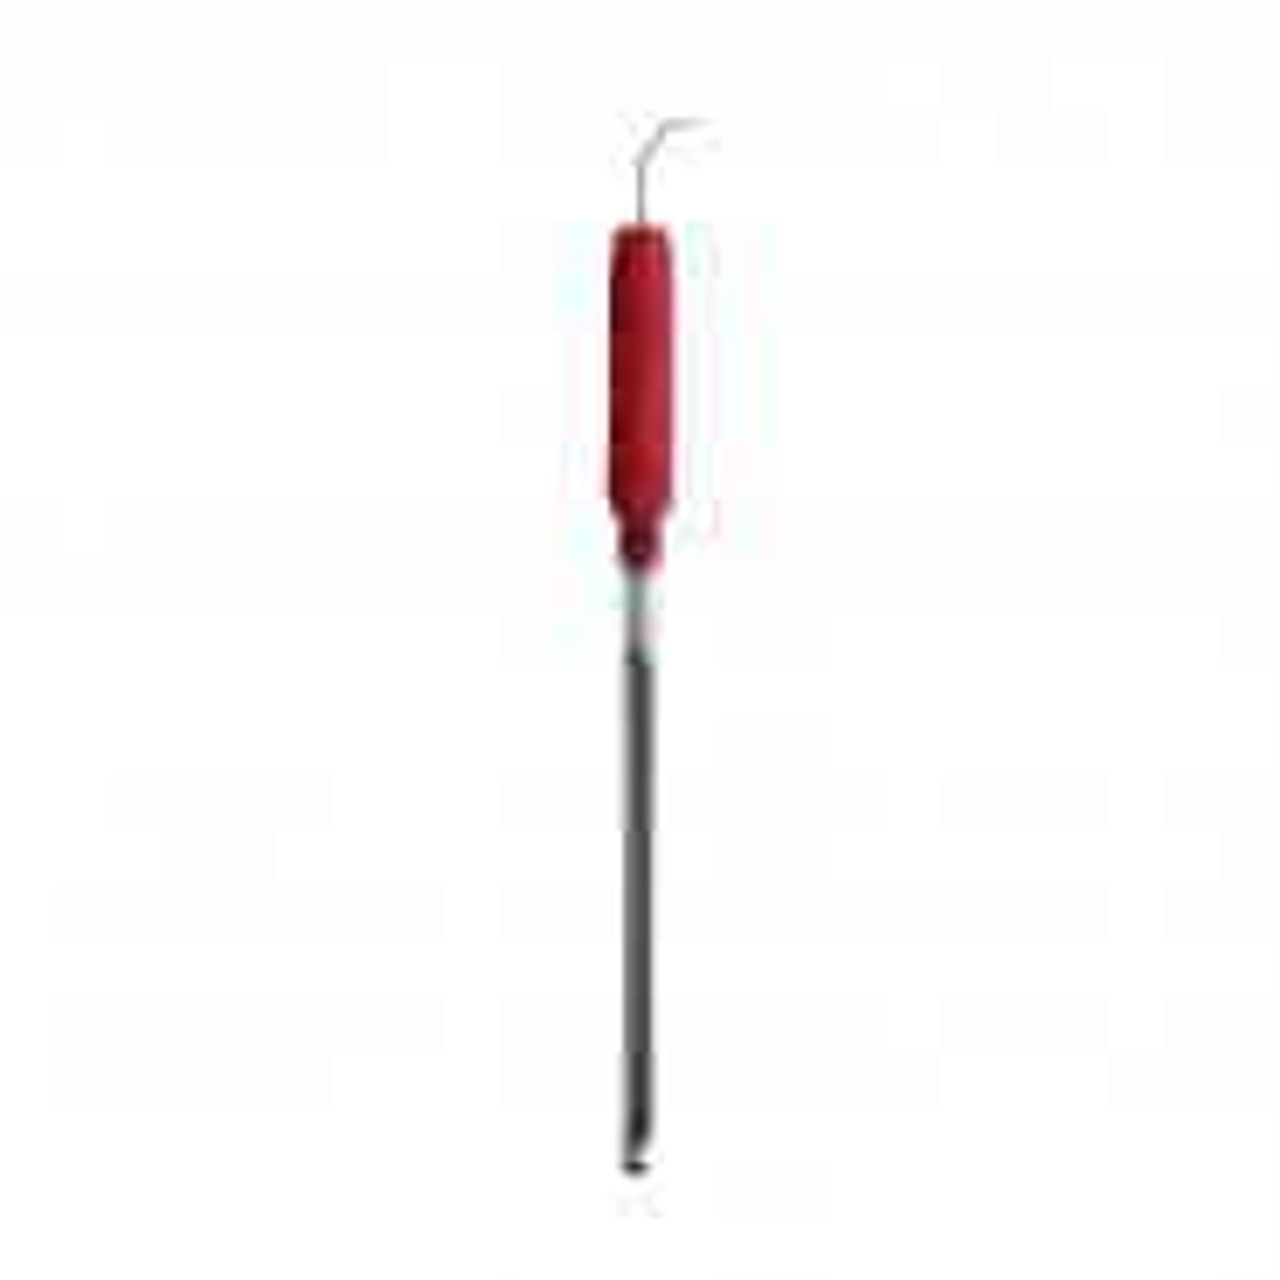 Hu-Friedy - After Five Streamline Direct Flow - Right 25k Red Resin Handle